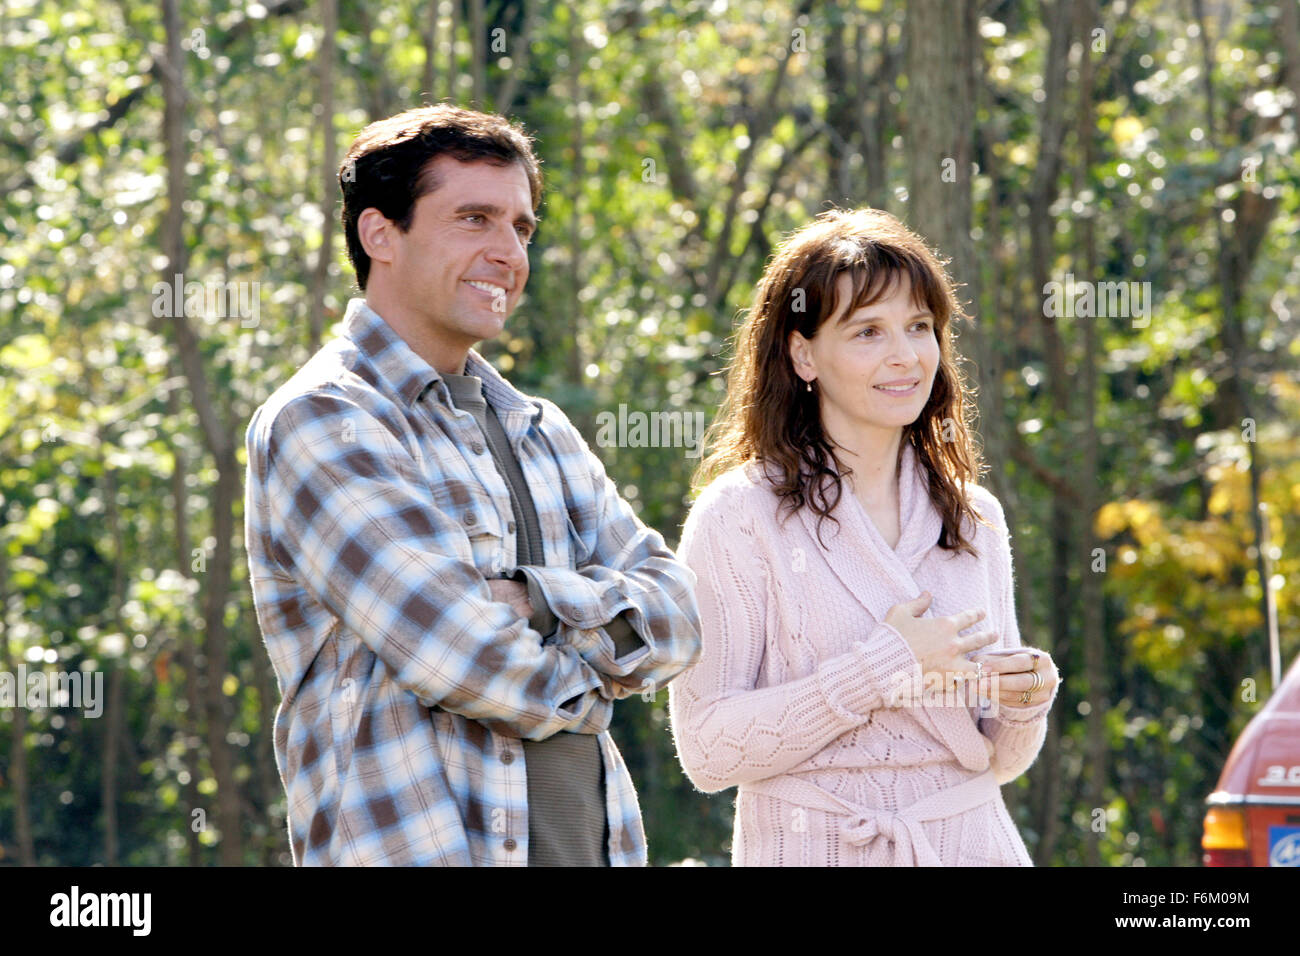 RELEASE DATE: October 26, 2007. MOVIE TITLE: Dan in Real Life. STUDIO: Touchstone Pictures. PLOT: A widower finds out the woman he fell in love with is his brother's girlfriend. PICTURED: STEVE CARELL, JULIETTE BINOCHE. Stock Photo